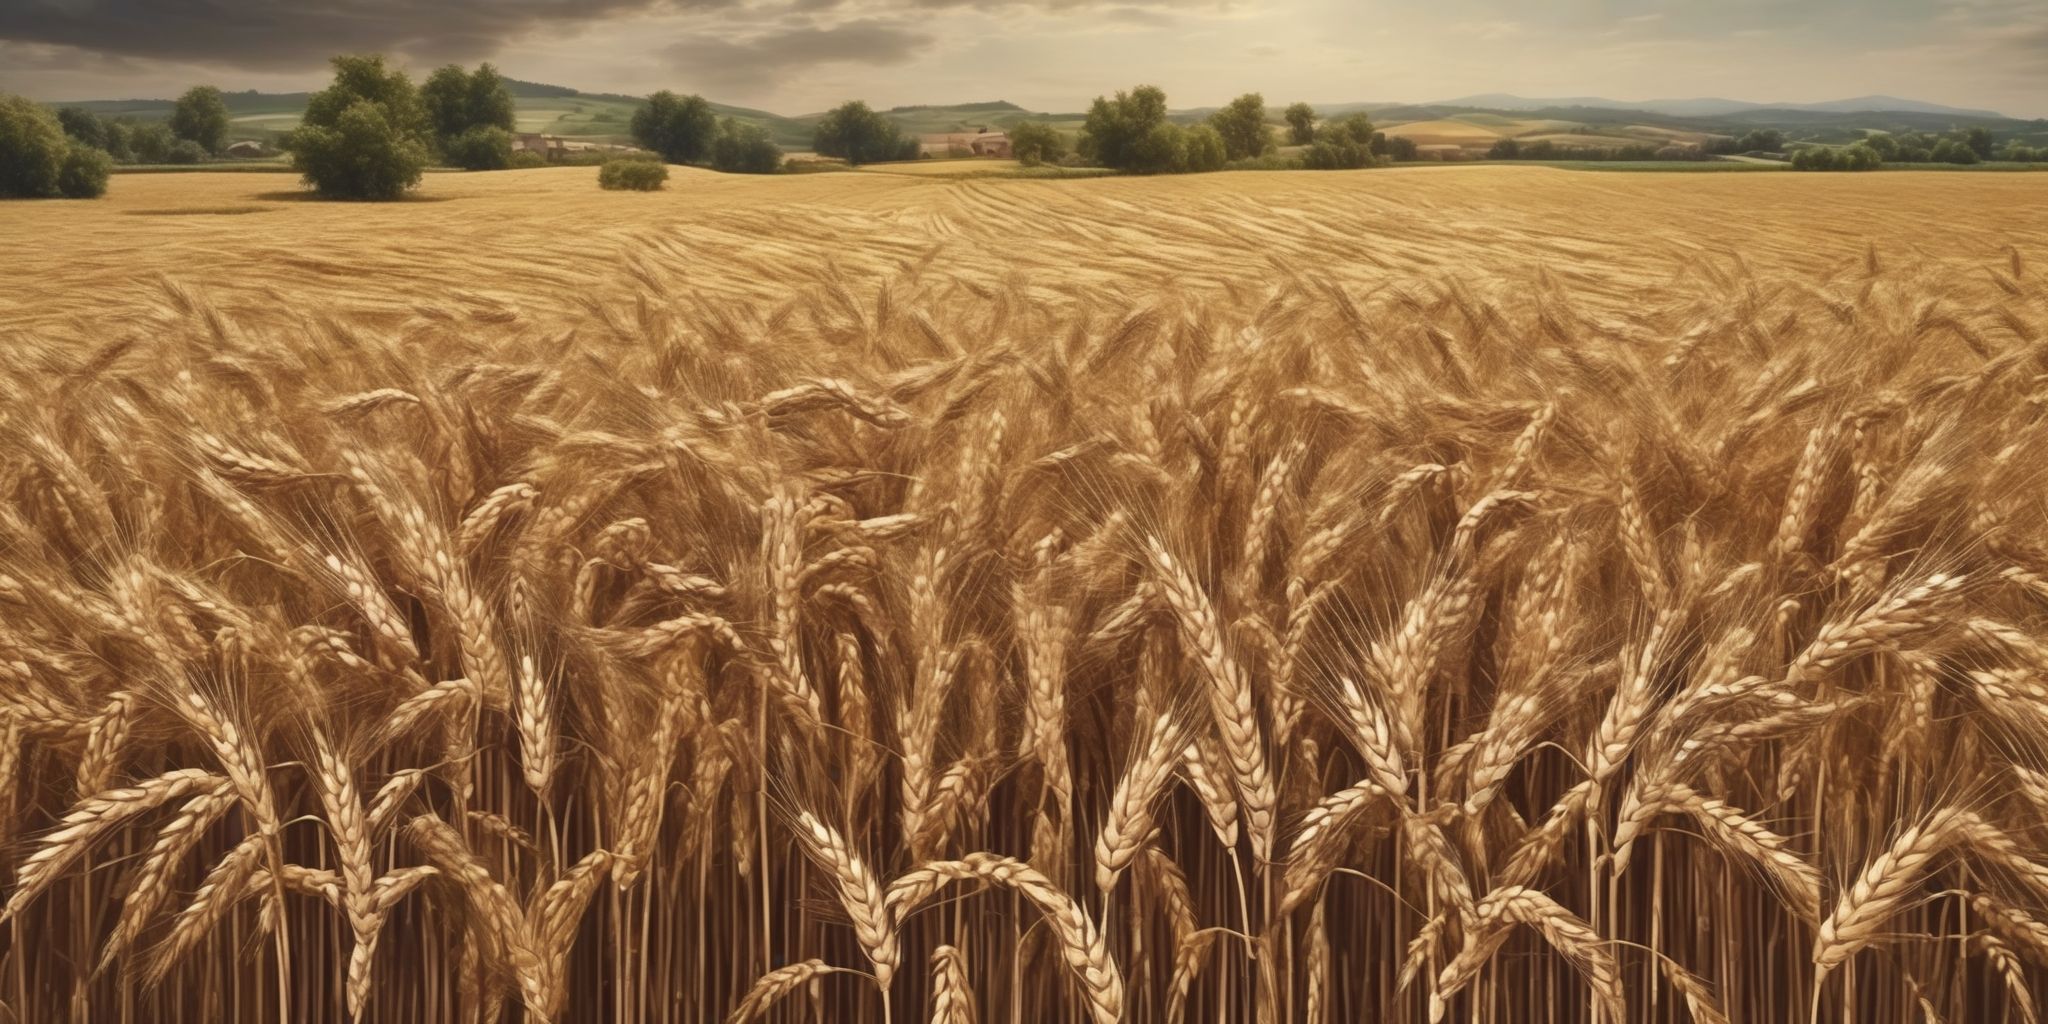 Wheat fields  in realistic, photographic style